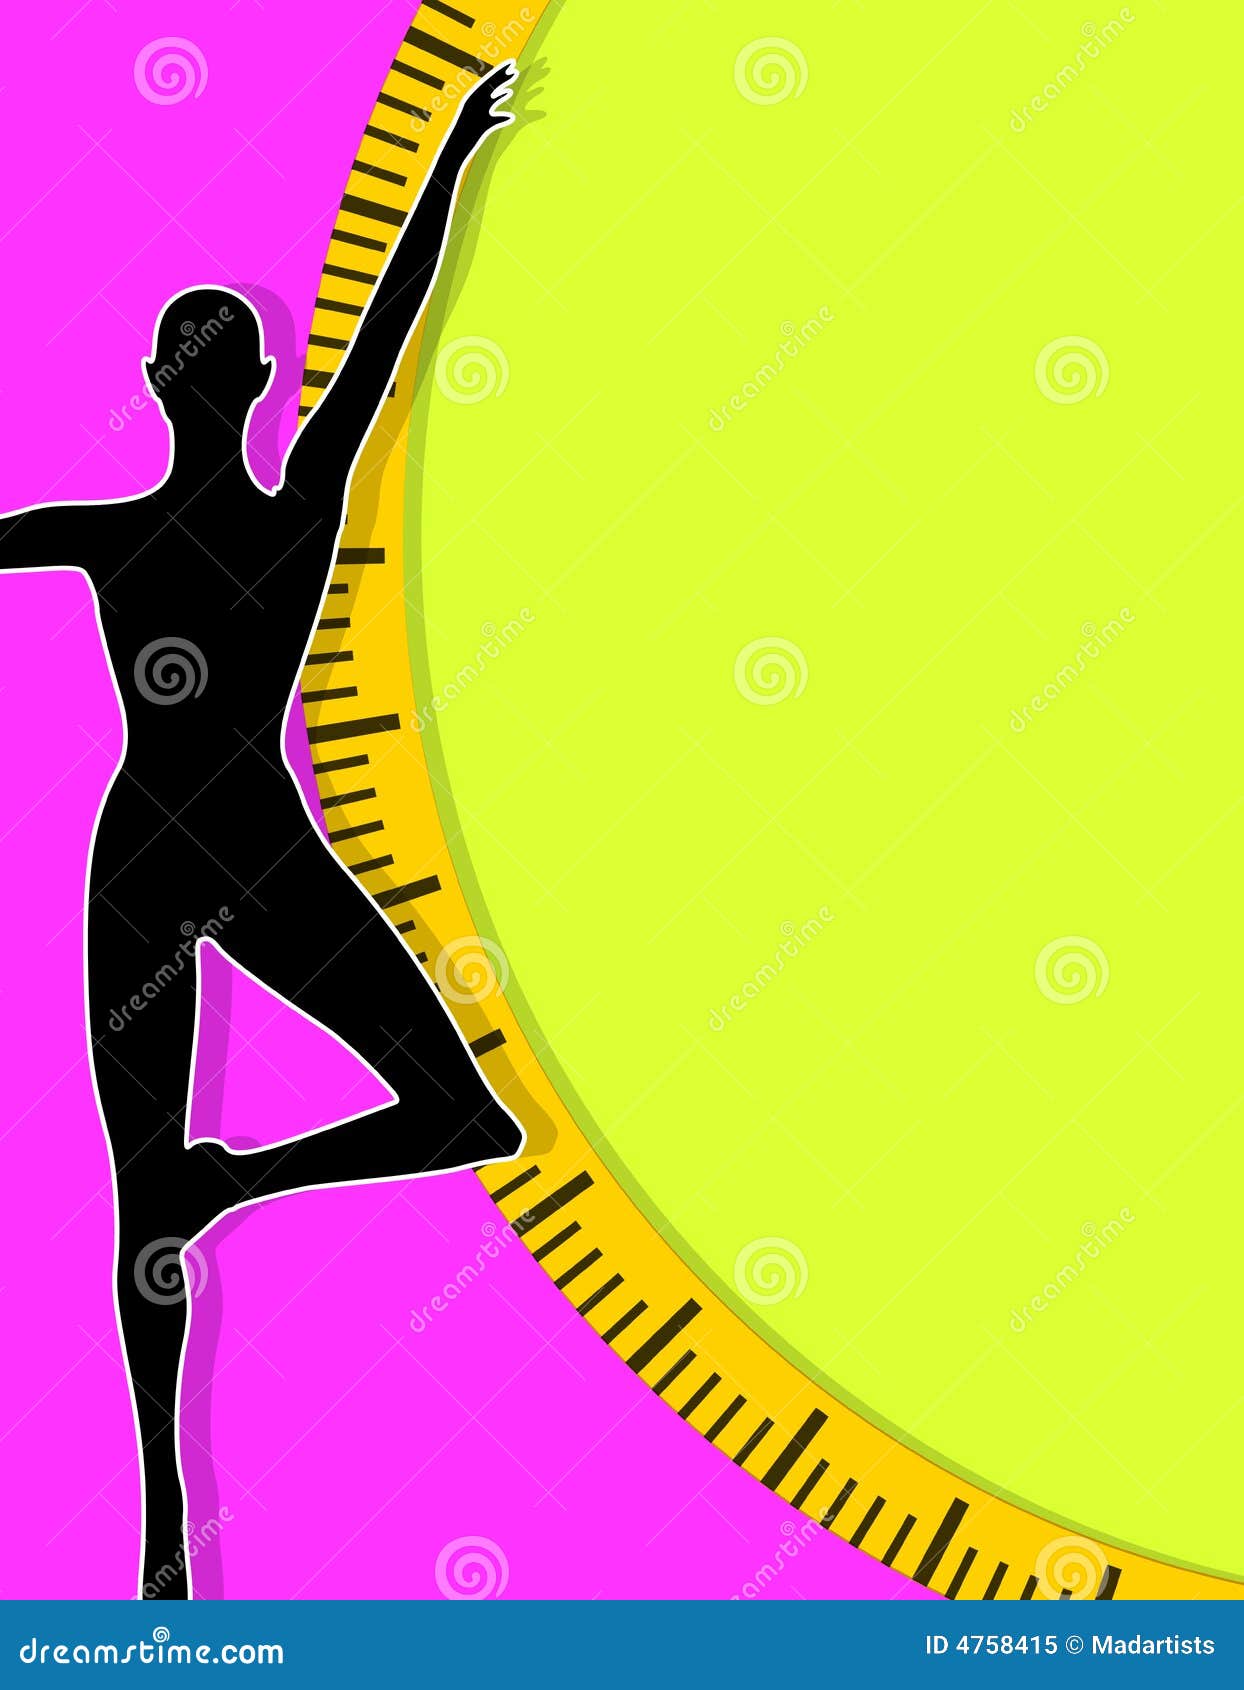 free clipart images weight loss - photo #50